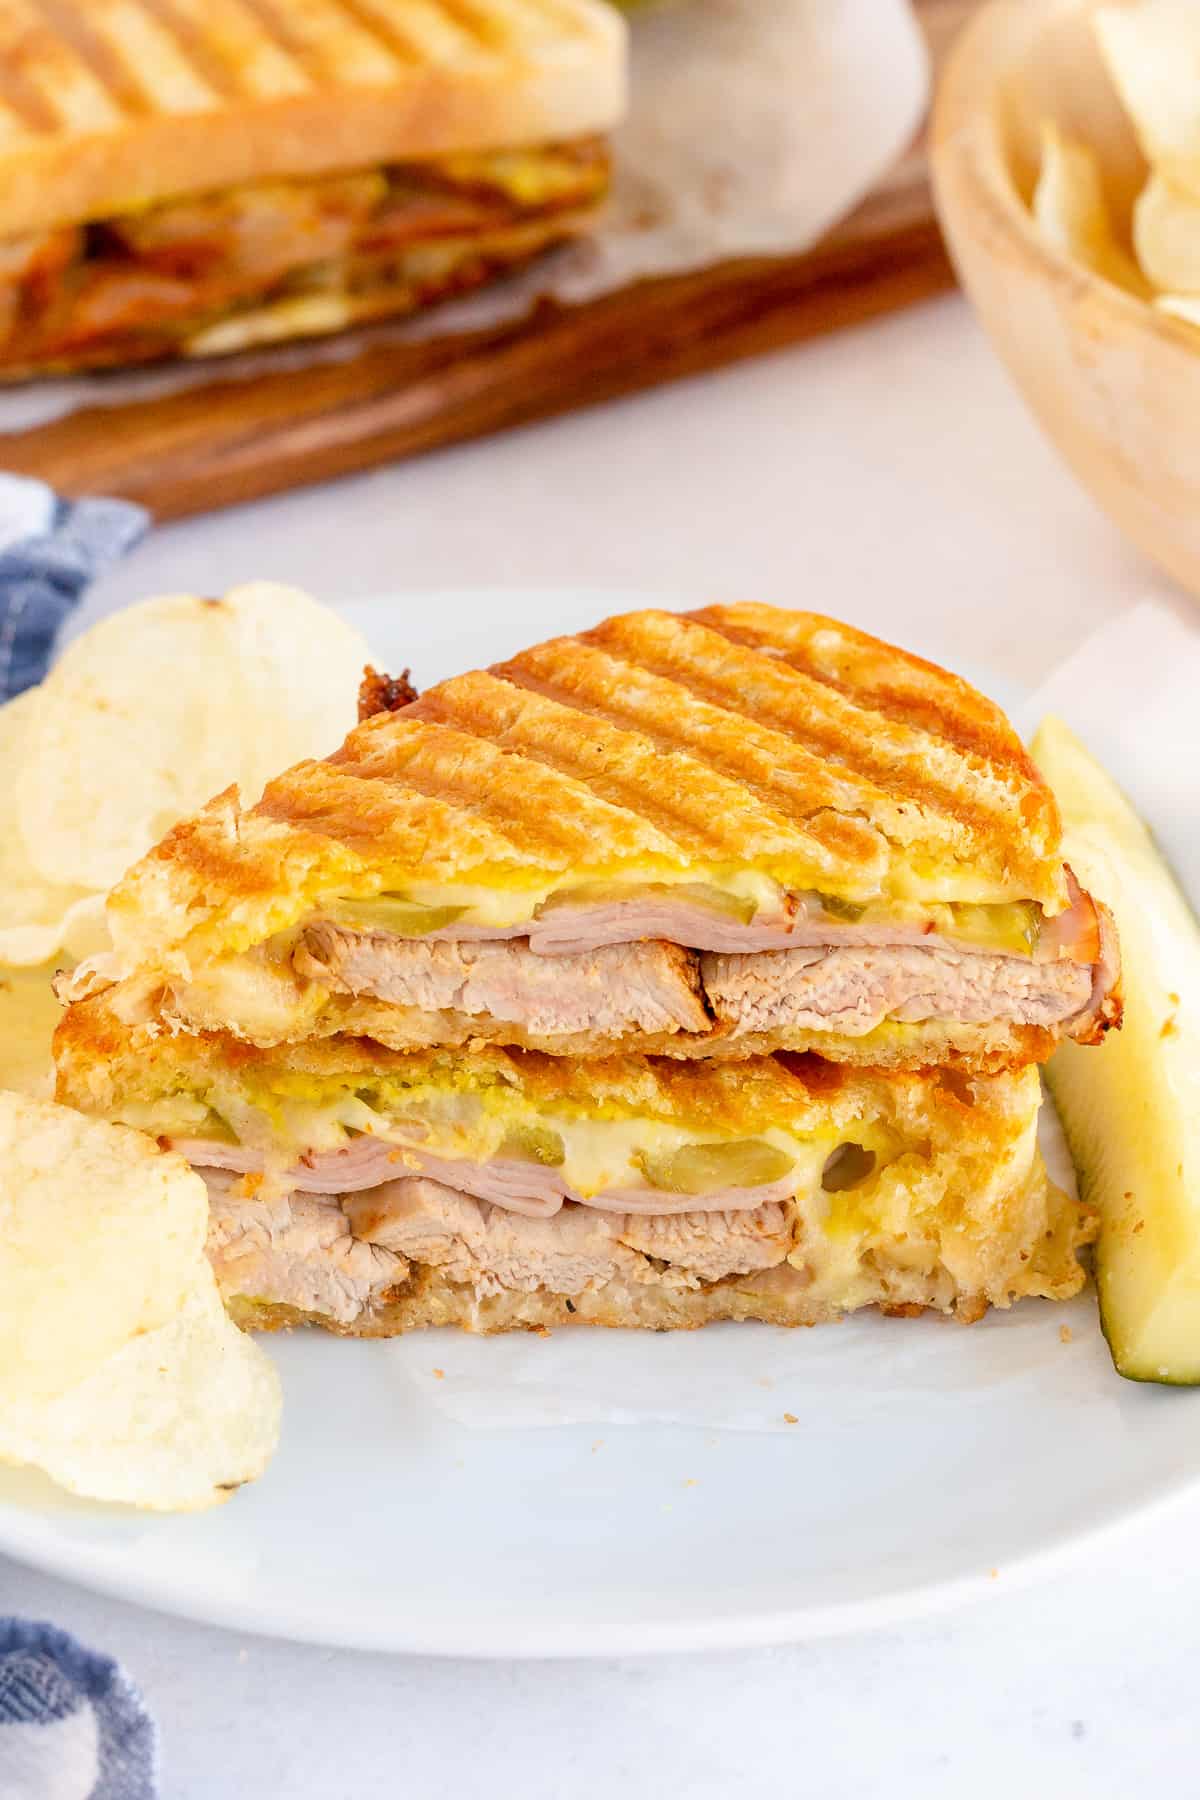 A cuban sandwich on a plate with a pickle and potato chips.